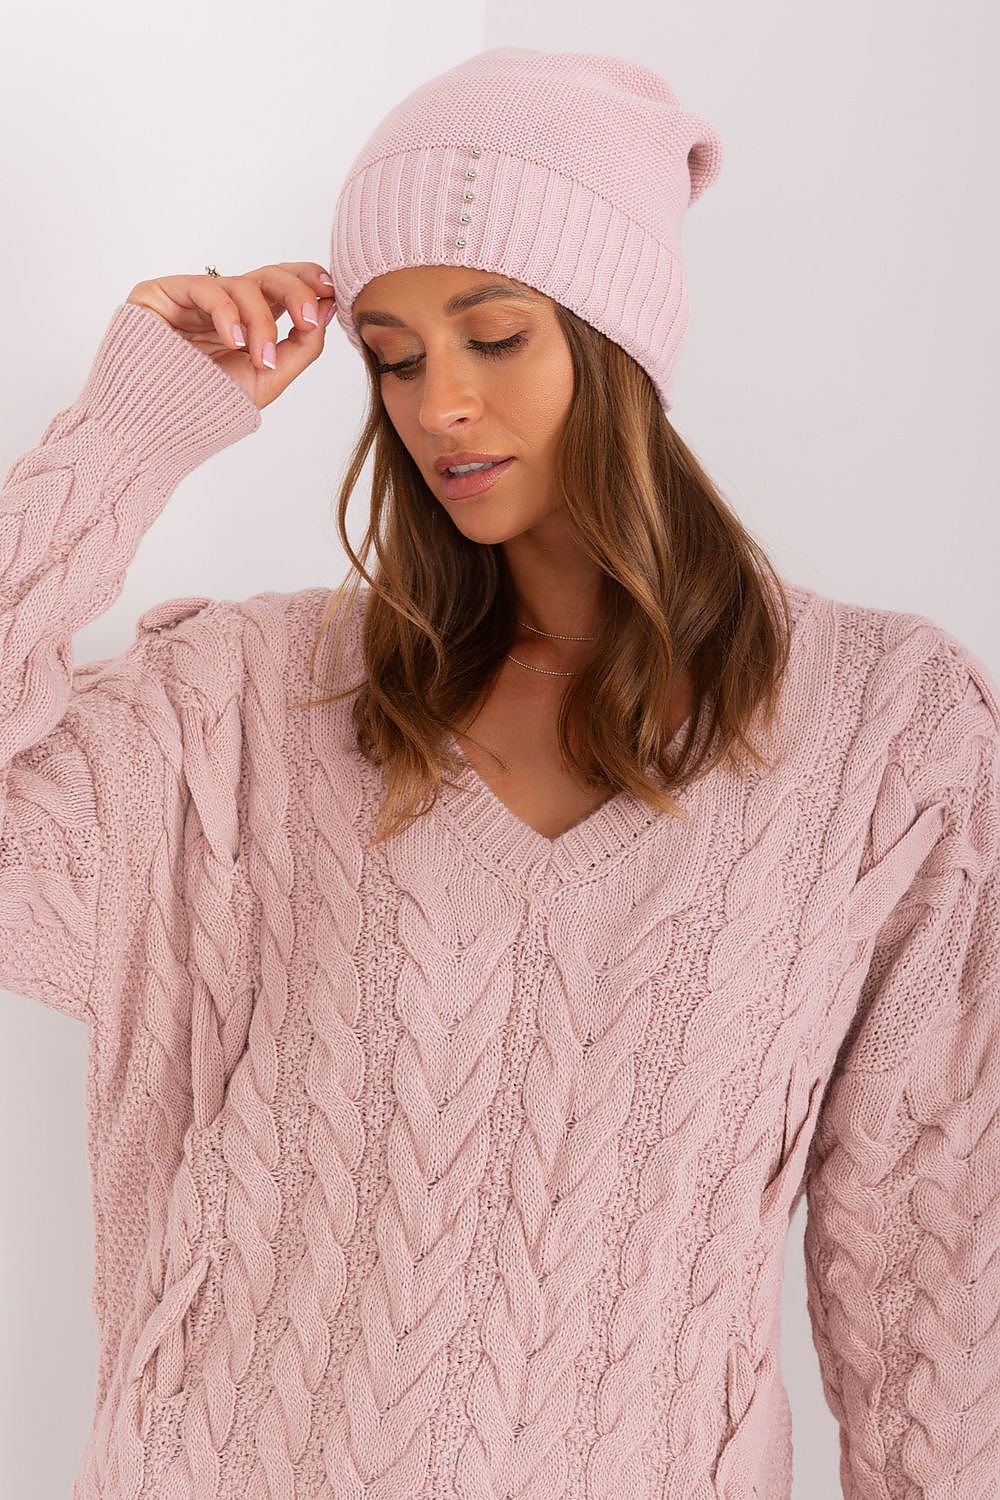 Deco Pearl Texture Beanie - Light Pink